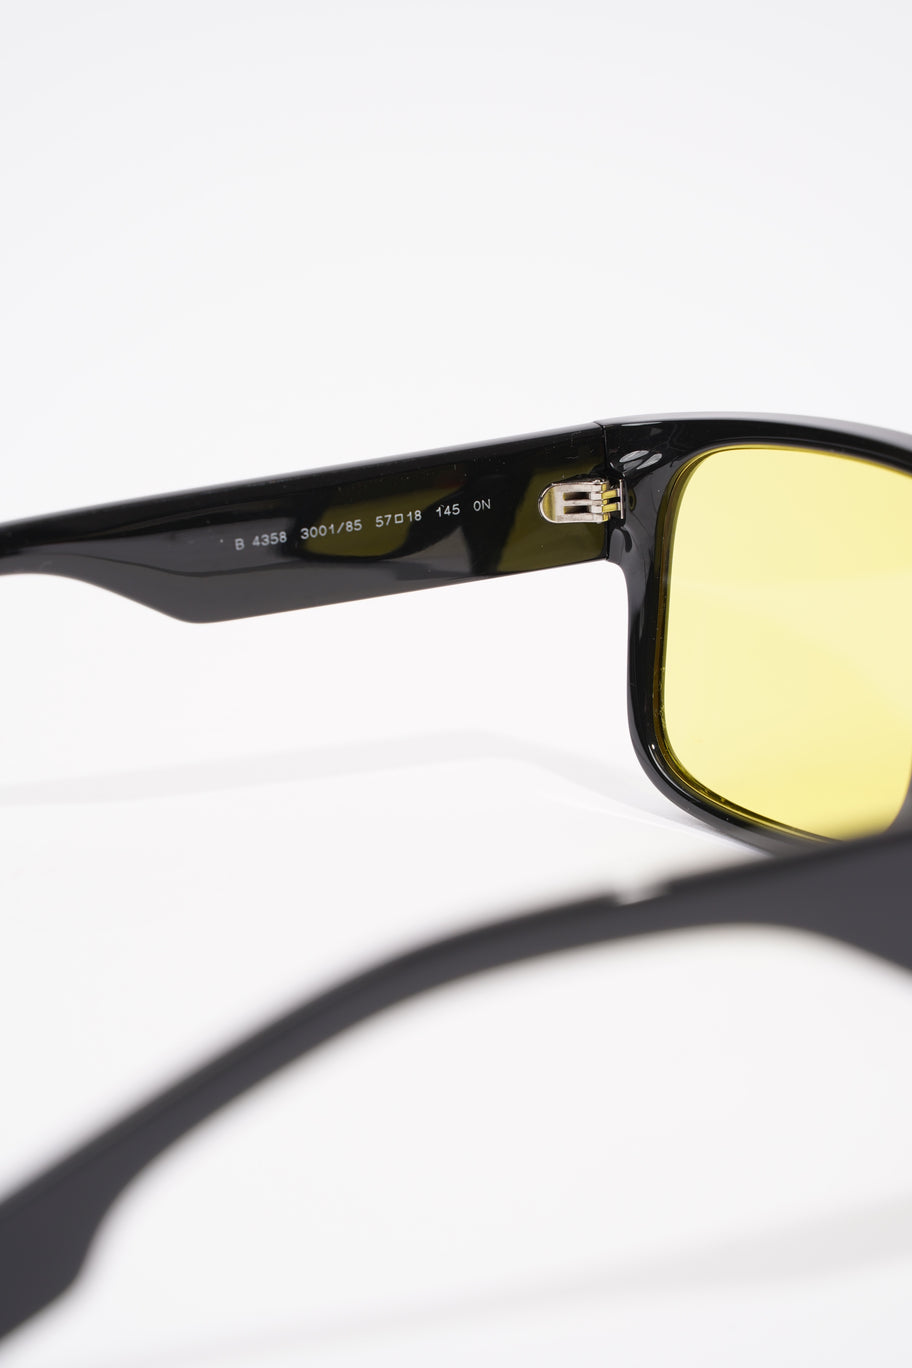 Knight Square Tinted Sunglasses Black / Yellow Acetate 145mm Image 7